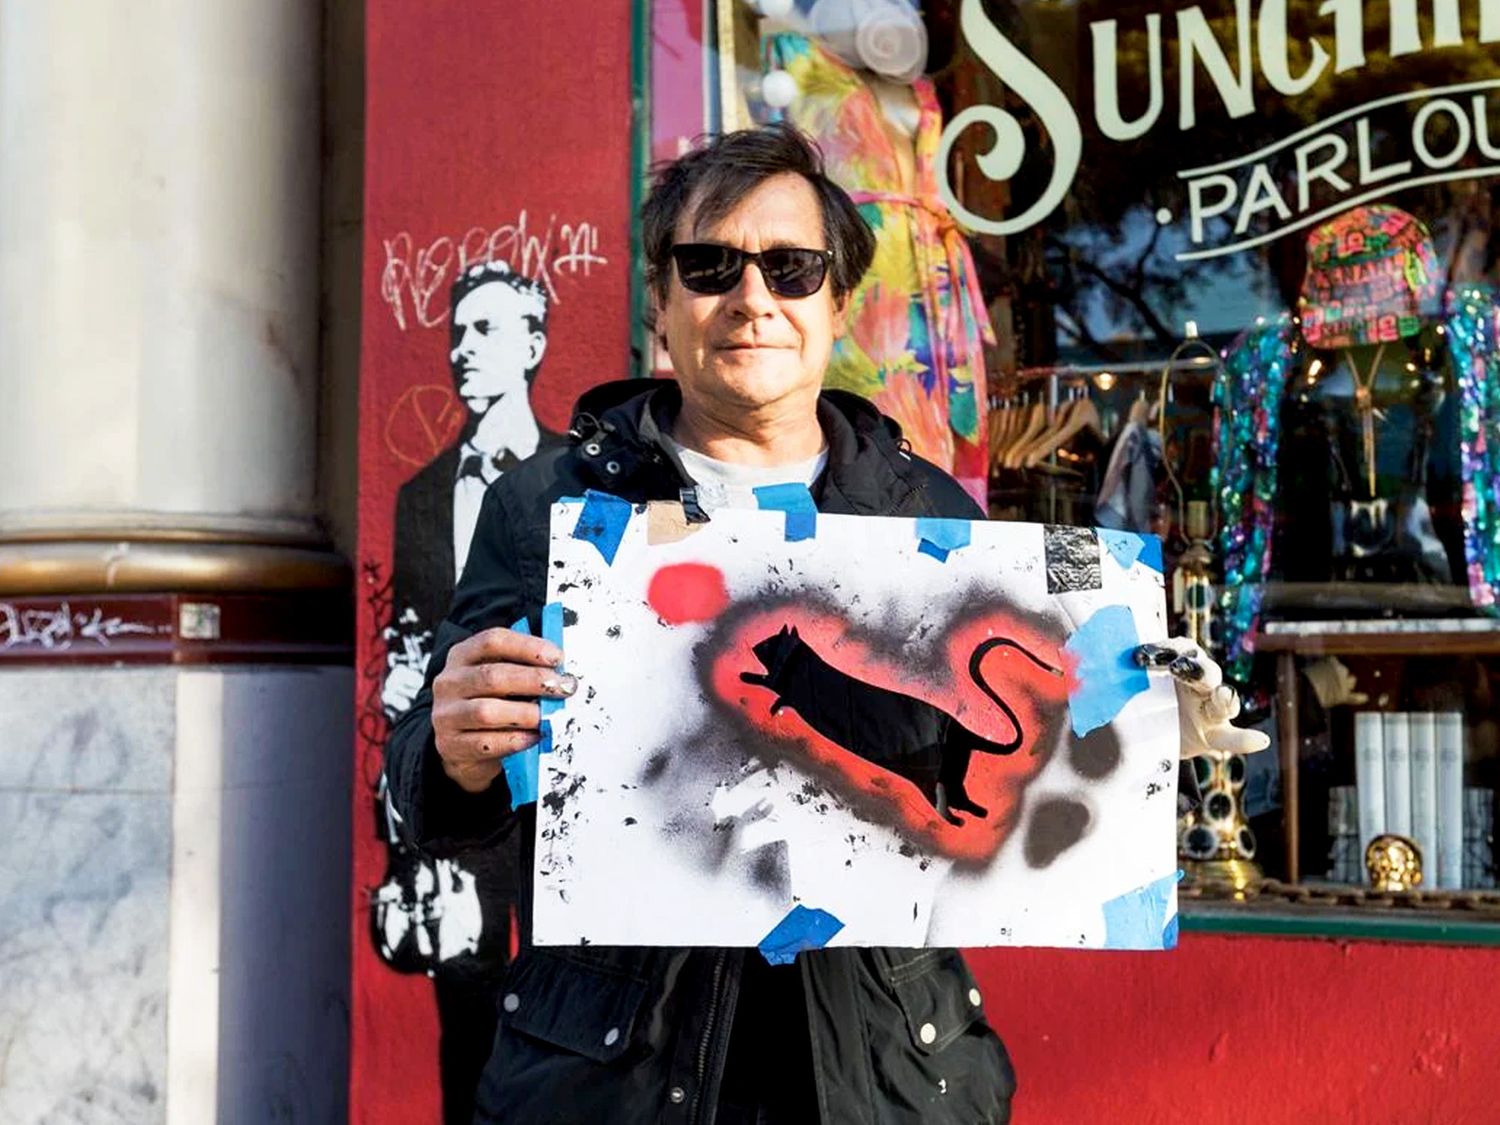 The founding father of stencil art that would inspire Banksy, Blek the Rat began painting his rats in 1981 in Paris. The artist above holding his most iconic stencil of a rat (©Waco Tribune-Herald).